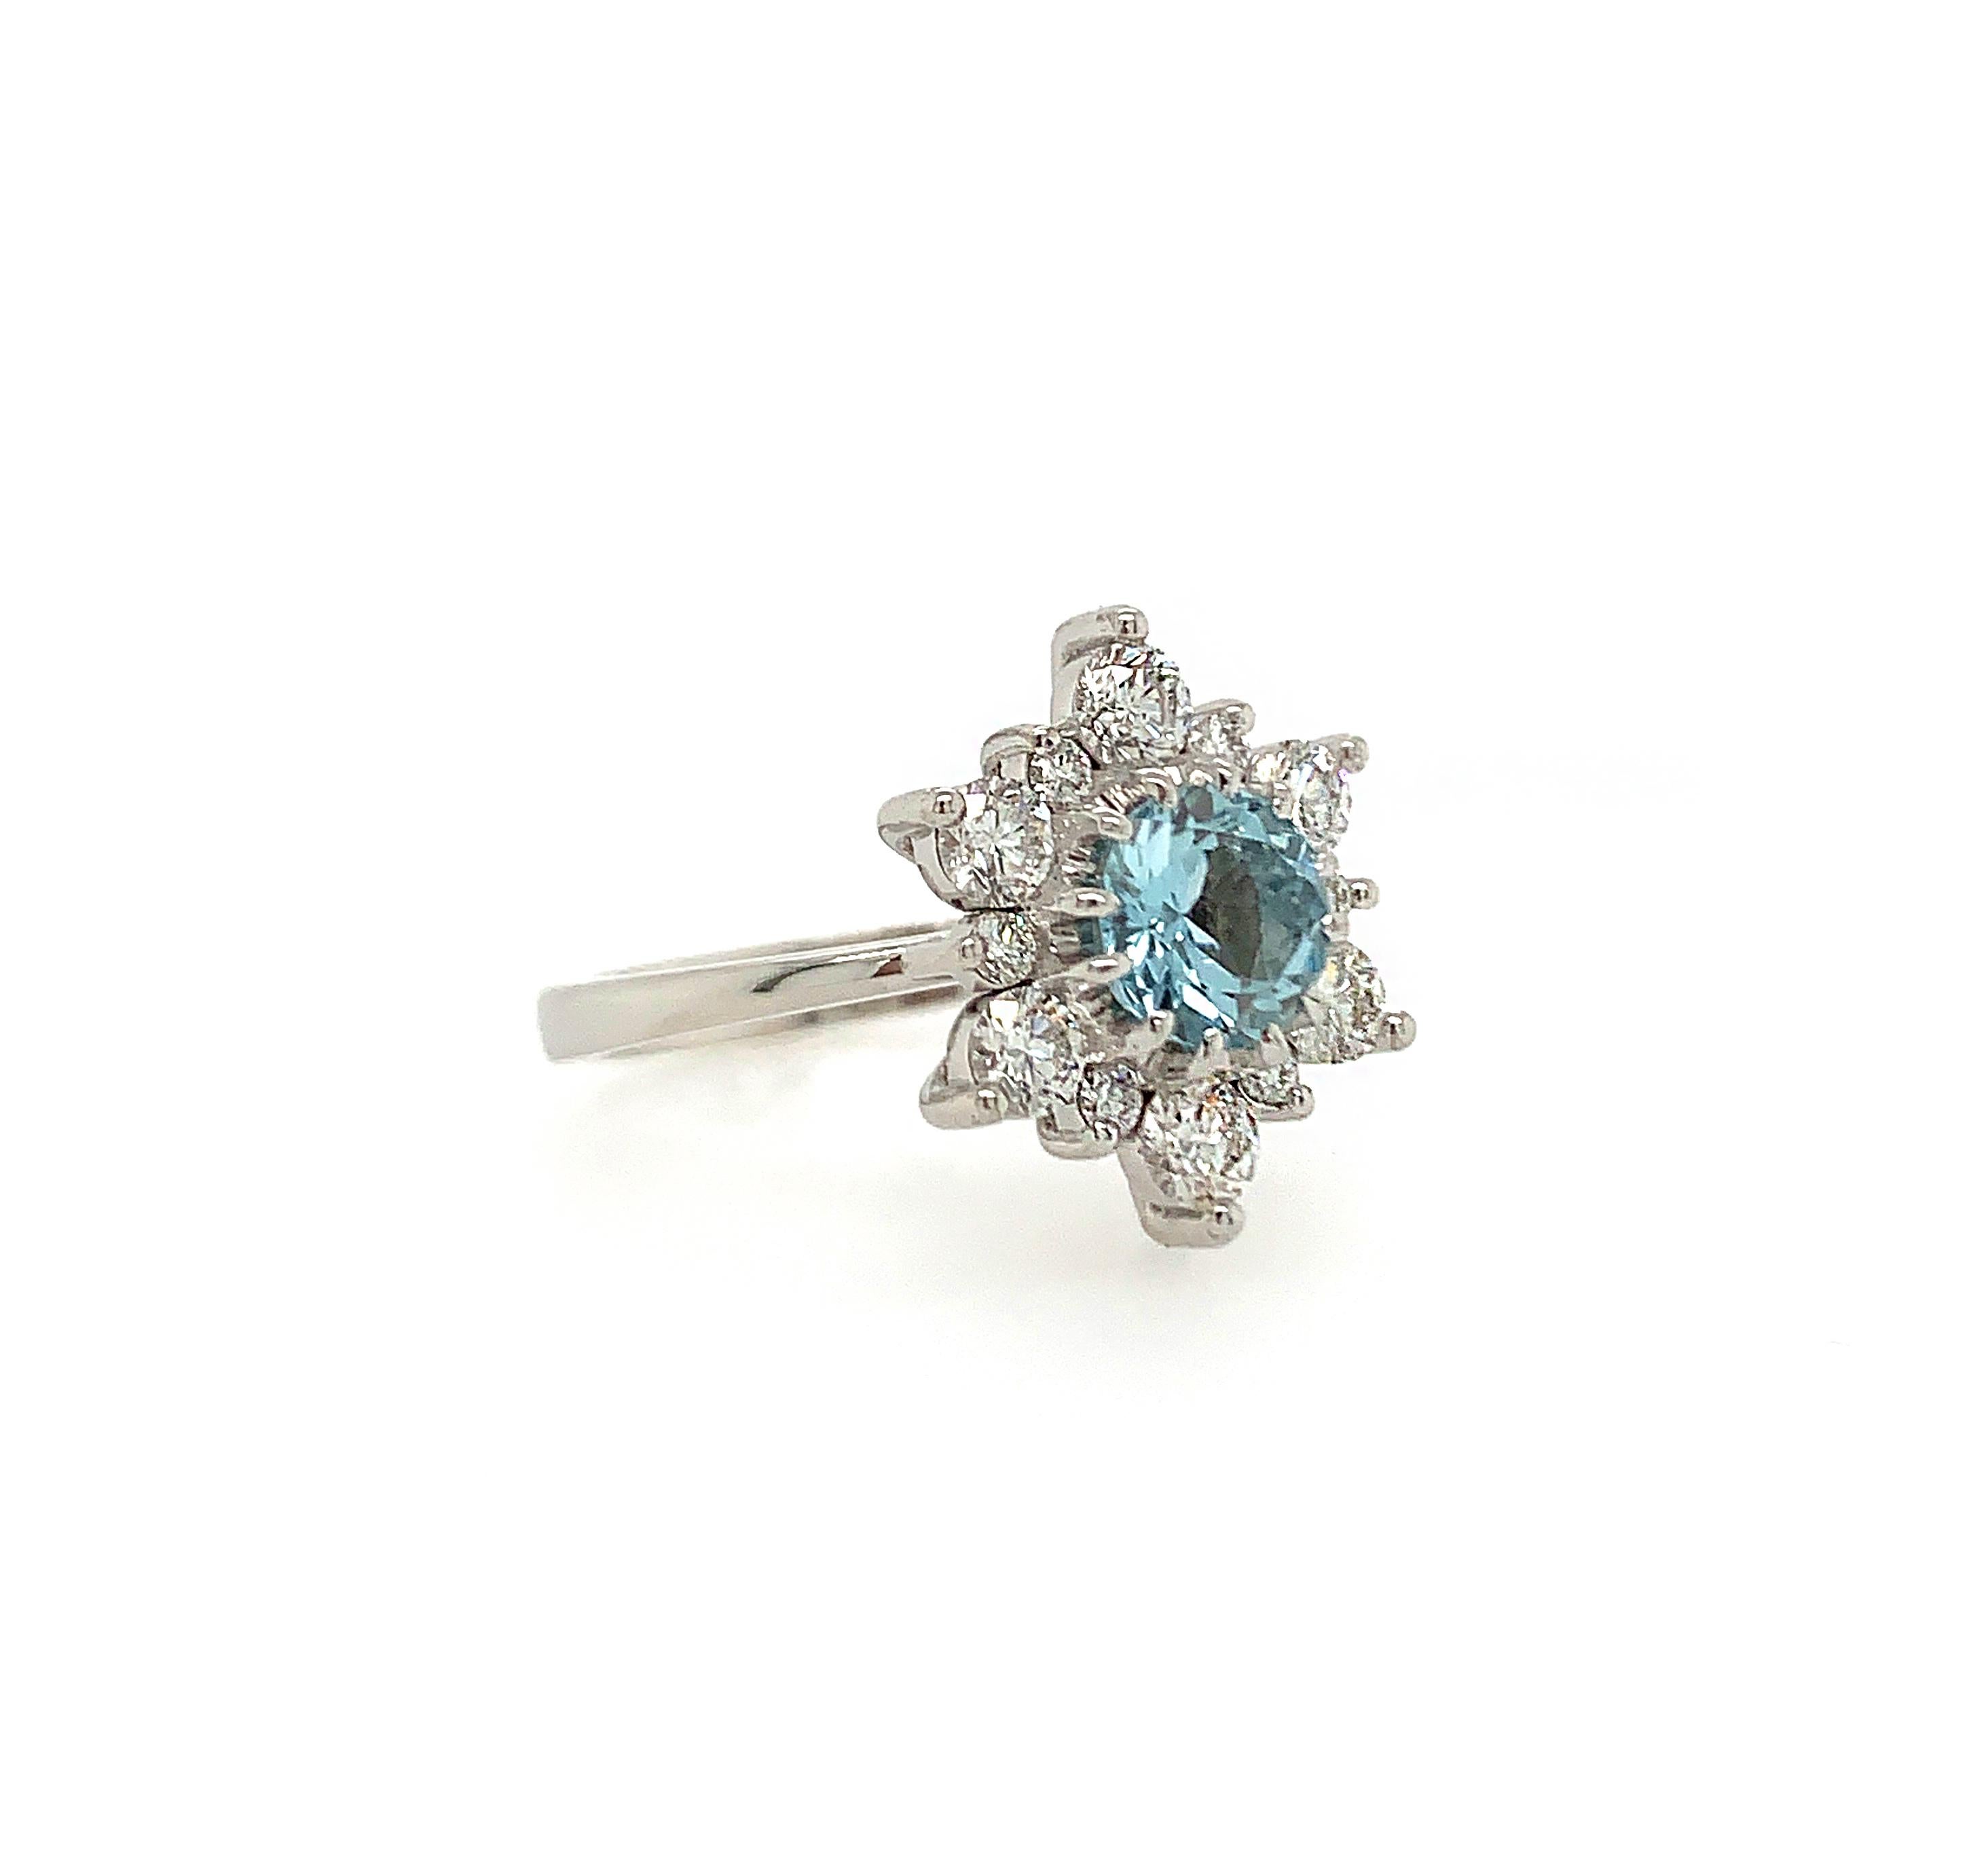 This beautiful ring features a 0.80 carat round natural Aquamarine set atop an array of 12 white round brilliant diamonds in a snowflake pattern. 

Set in 14K white gold. 

Center stone: Natural Aquamarine - 0.80 carat.

Accent stones: Natural white